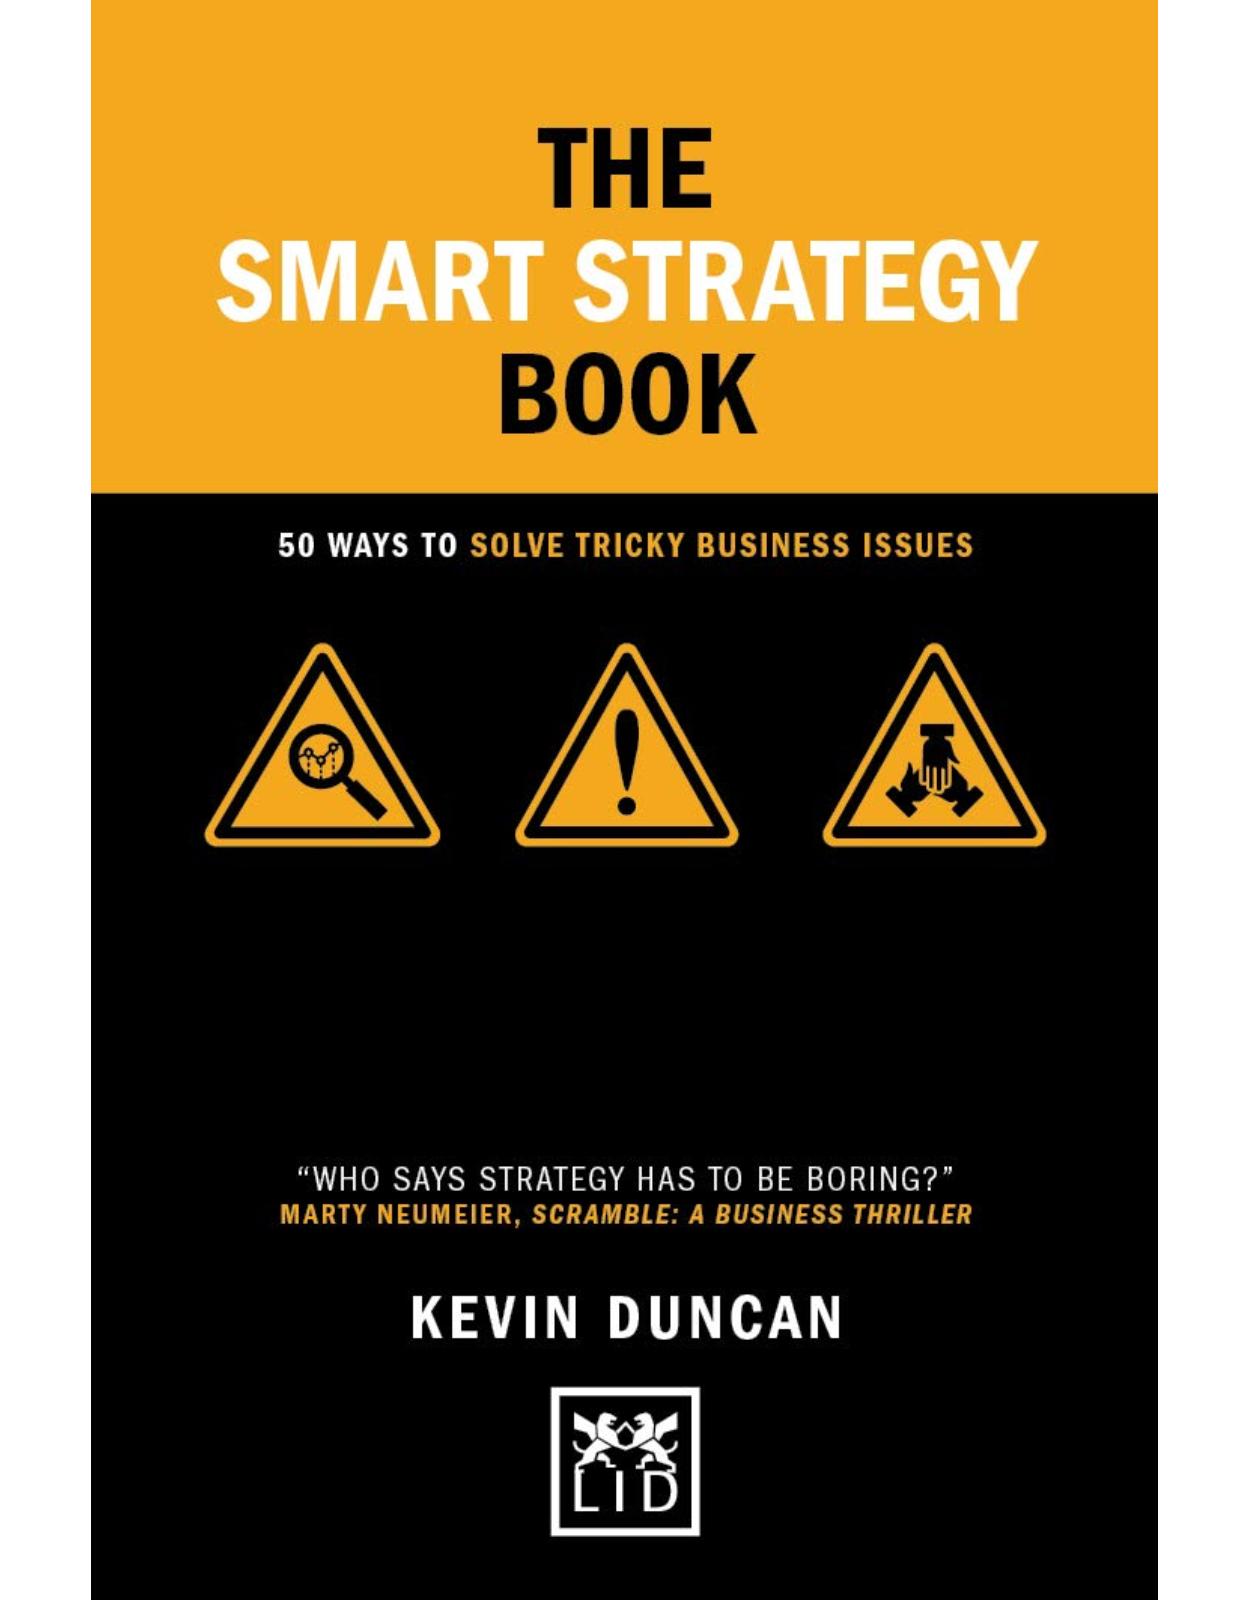 The Smart Strategy Book: 50 ways to solve tricky business issues